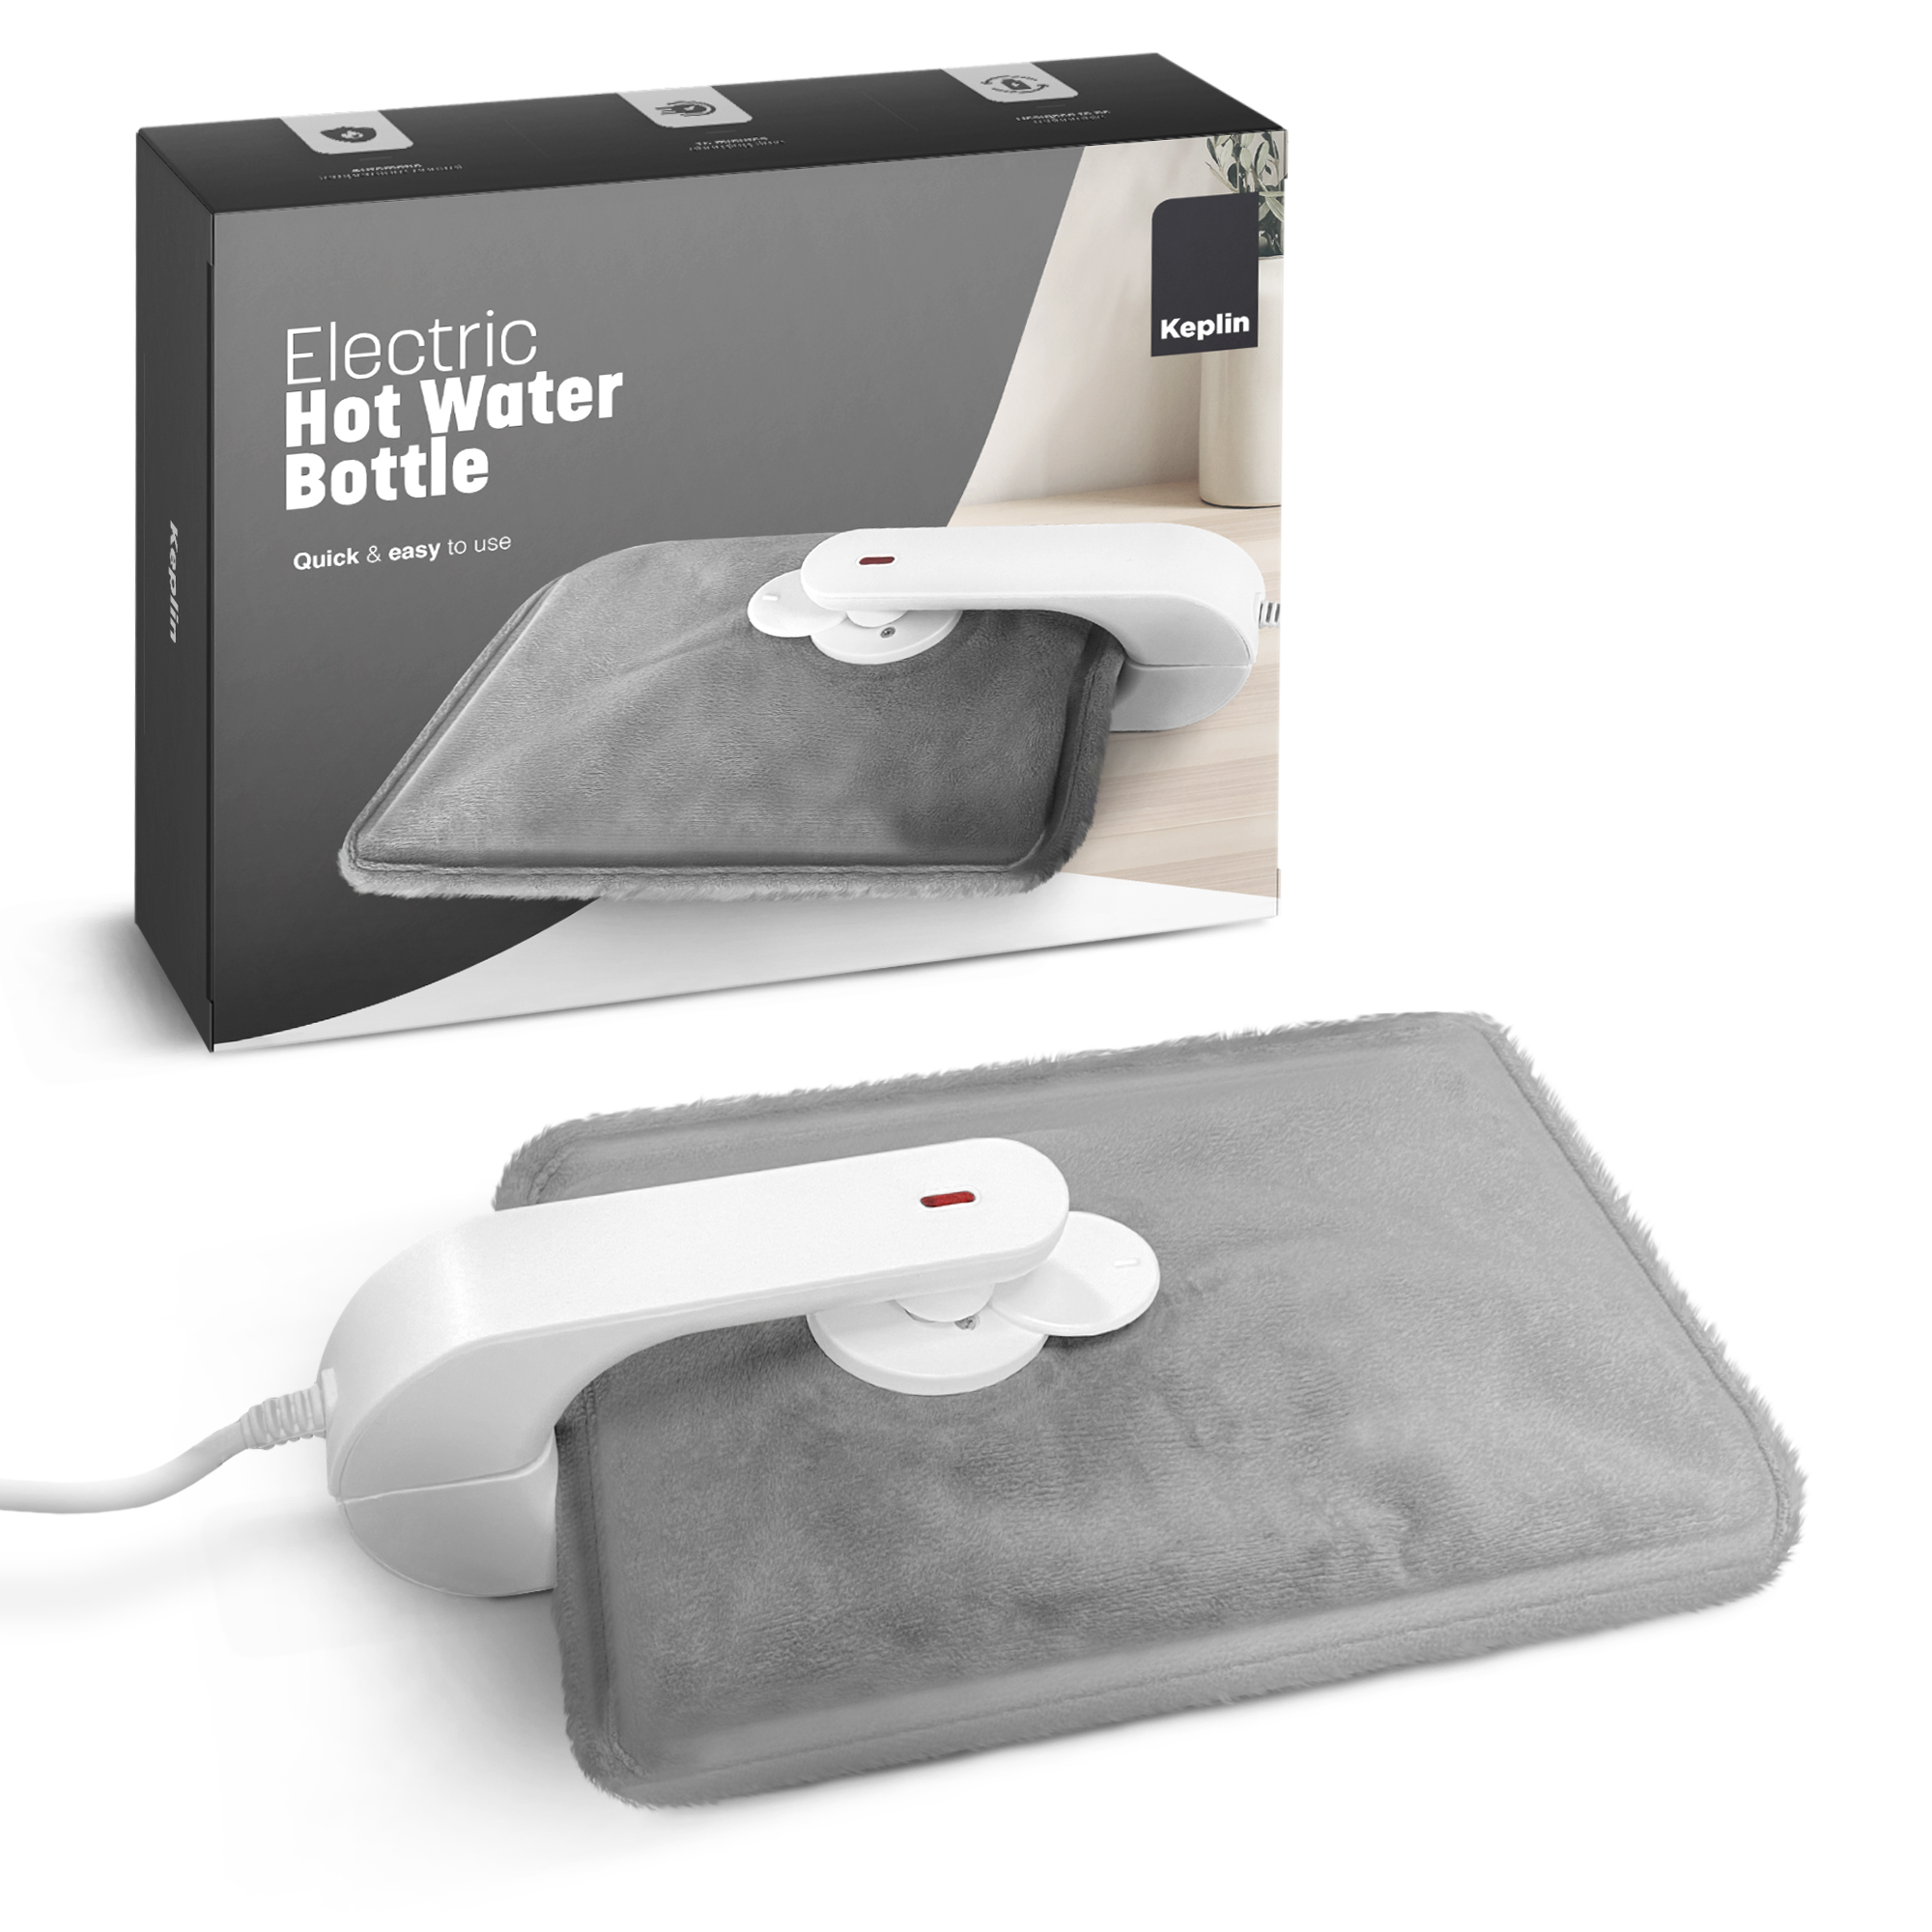 Rechargeable Electric Hot Water Bottle - Hand & Body Warmer, Fast Heating & Auto-Shut Off Function